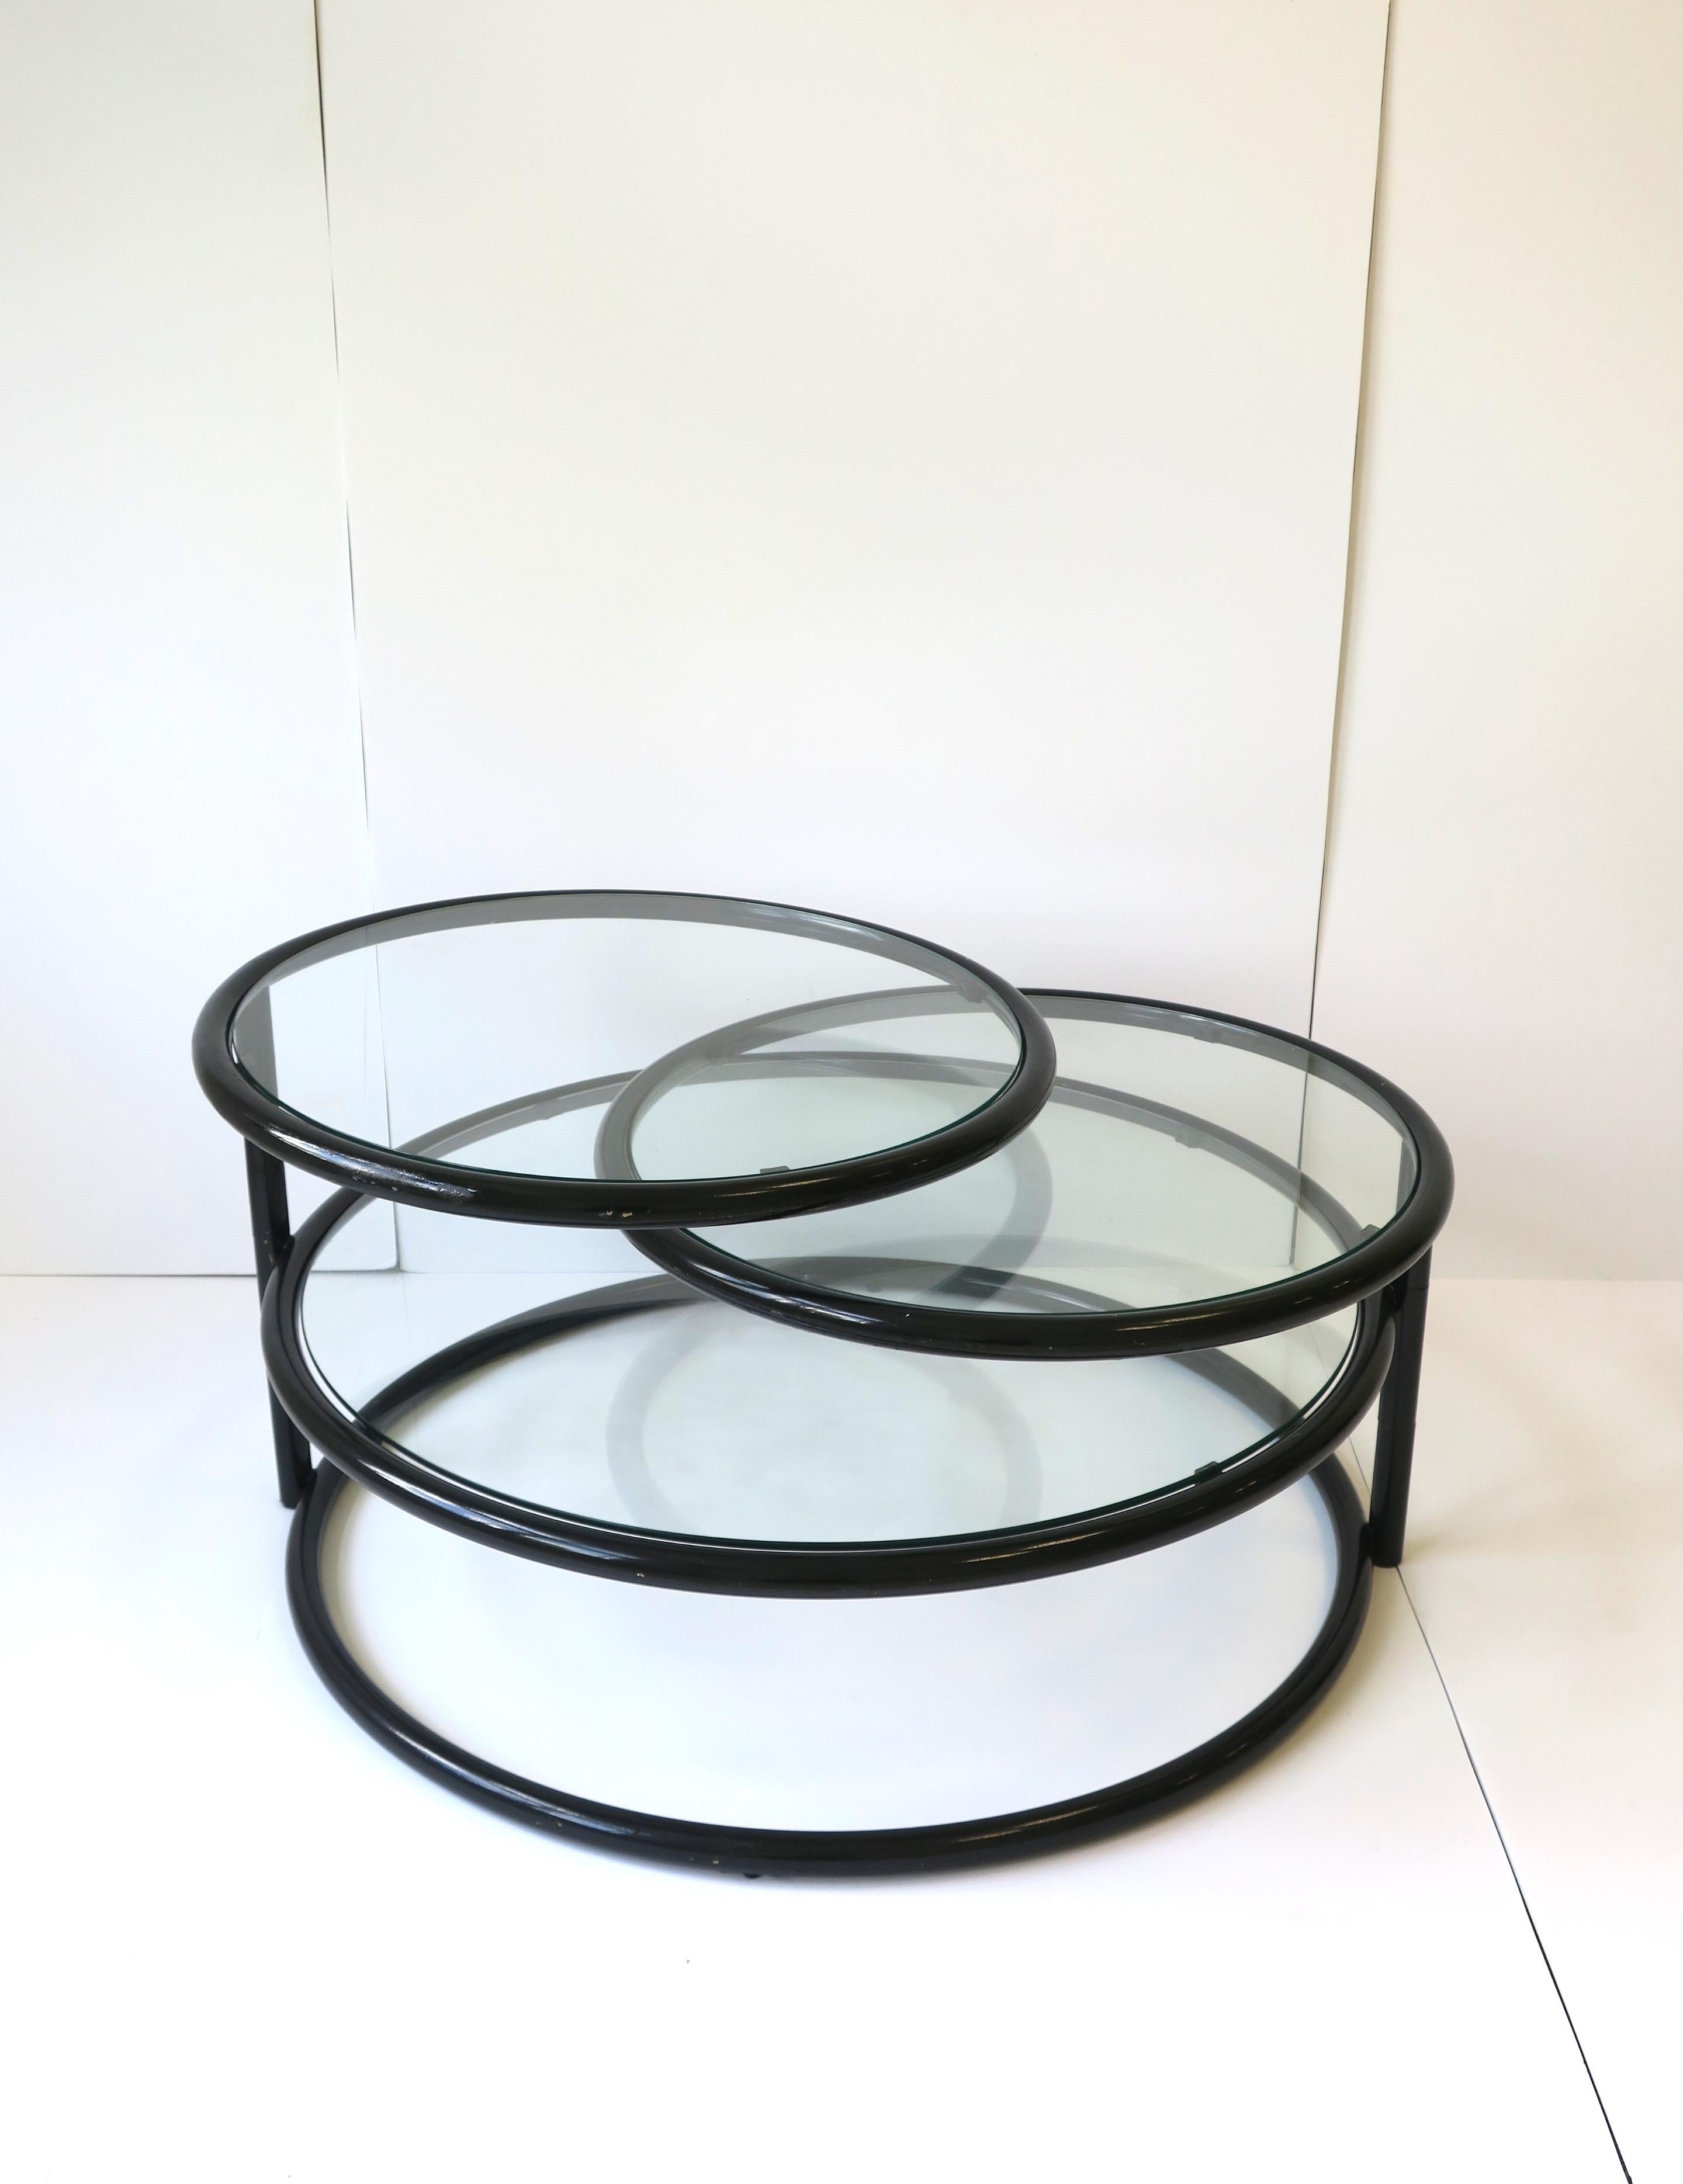 A Modern style Postmodern period three tier black coated tubular metal and glass swivel cocktail table in the style of designer Milo Baughman, circa late-20th century, 1970s or later. The top two tiers of this versatile cocktail table swivel out as